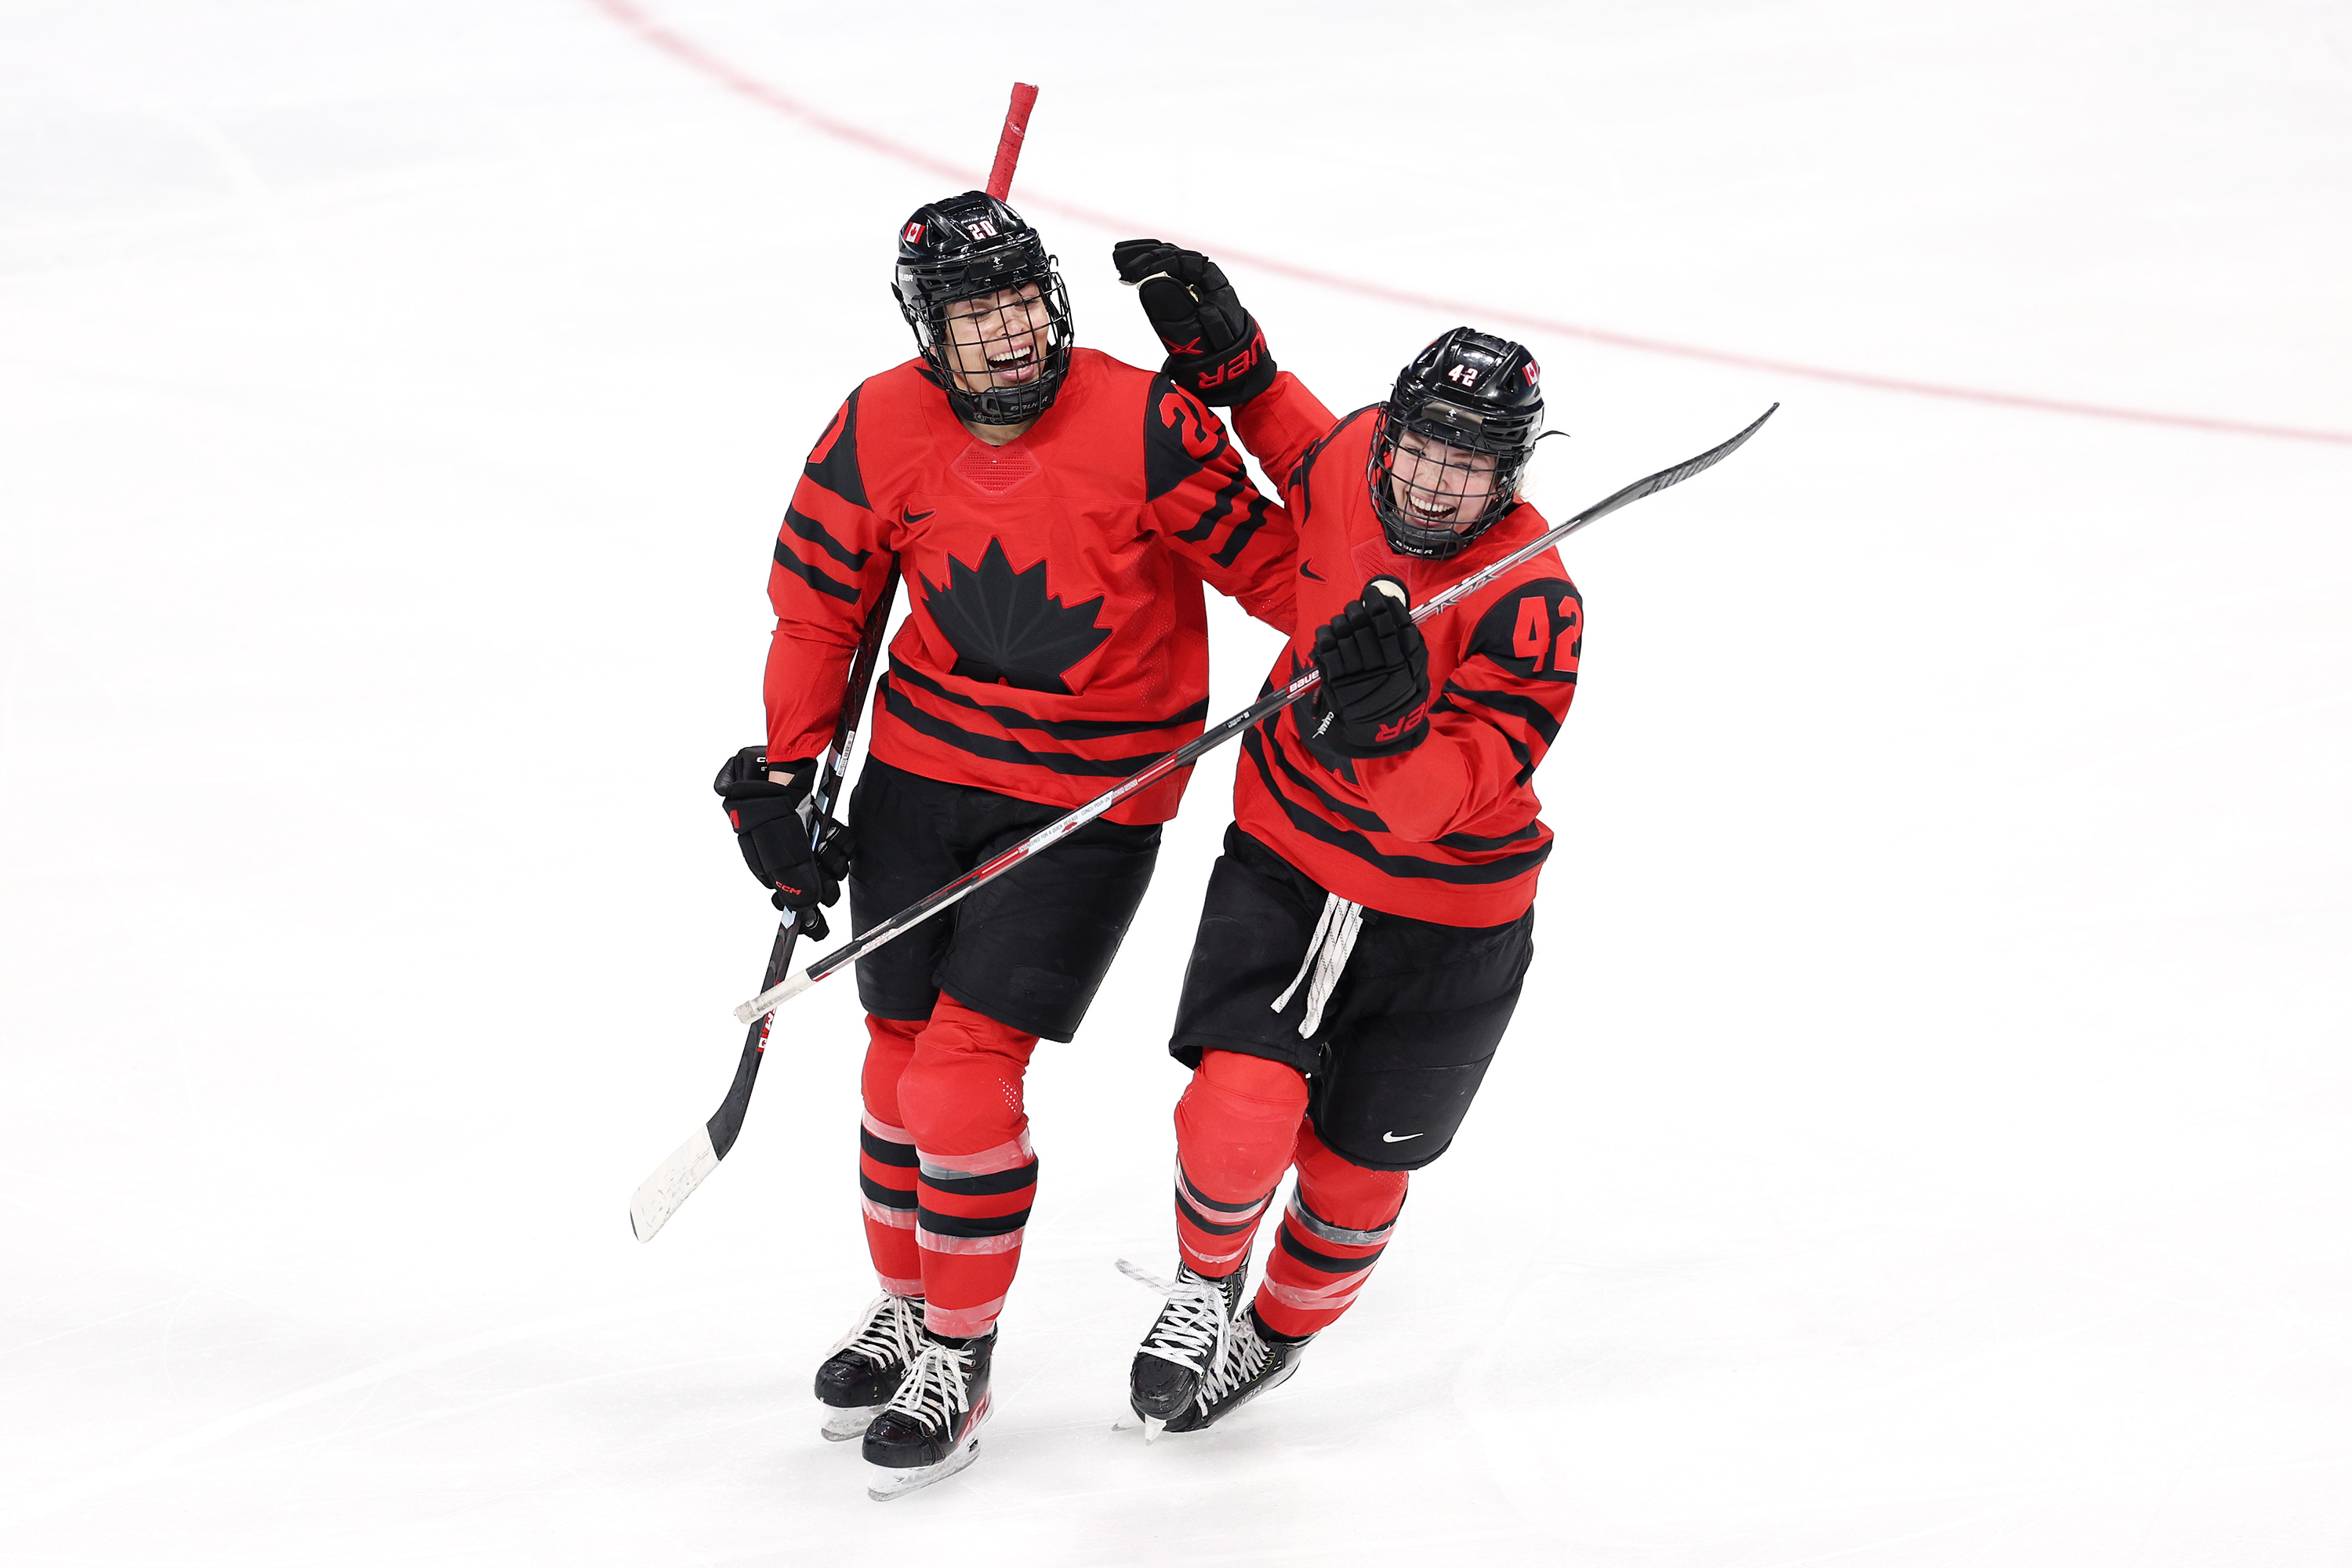 Women's hockey players to fight for visibility after Winter Olympics